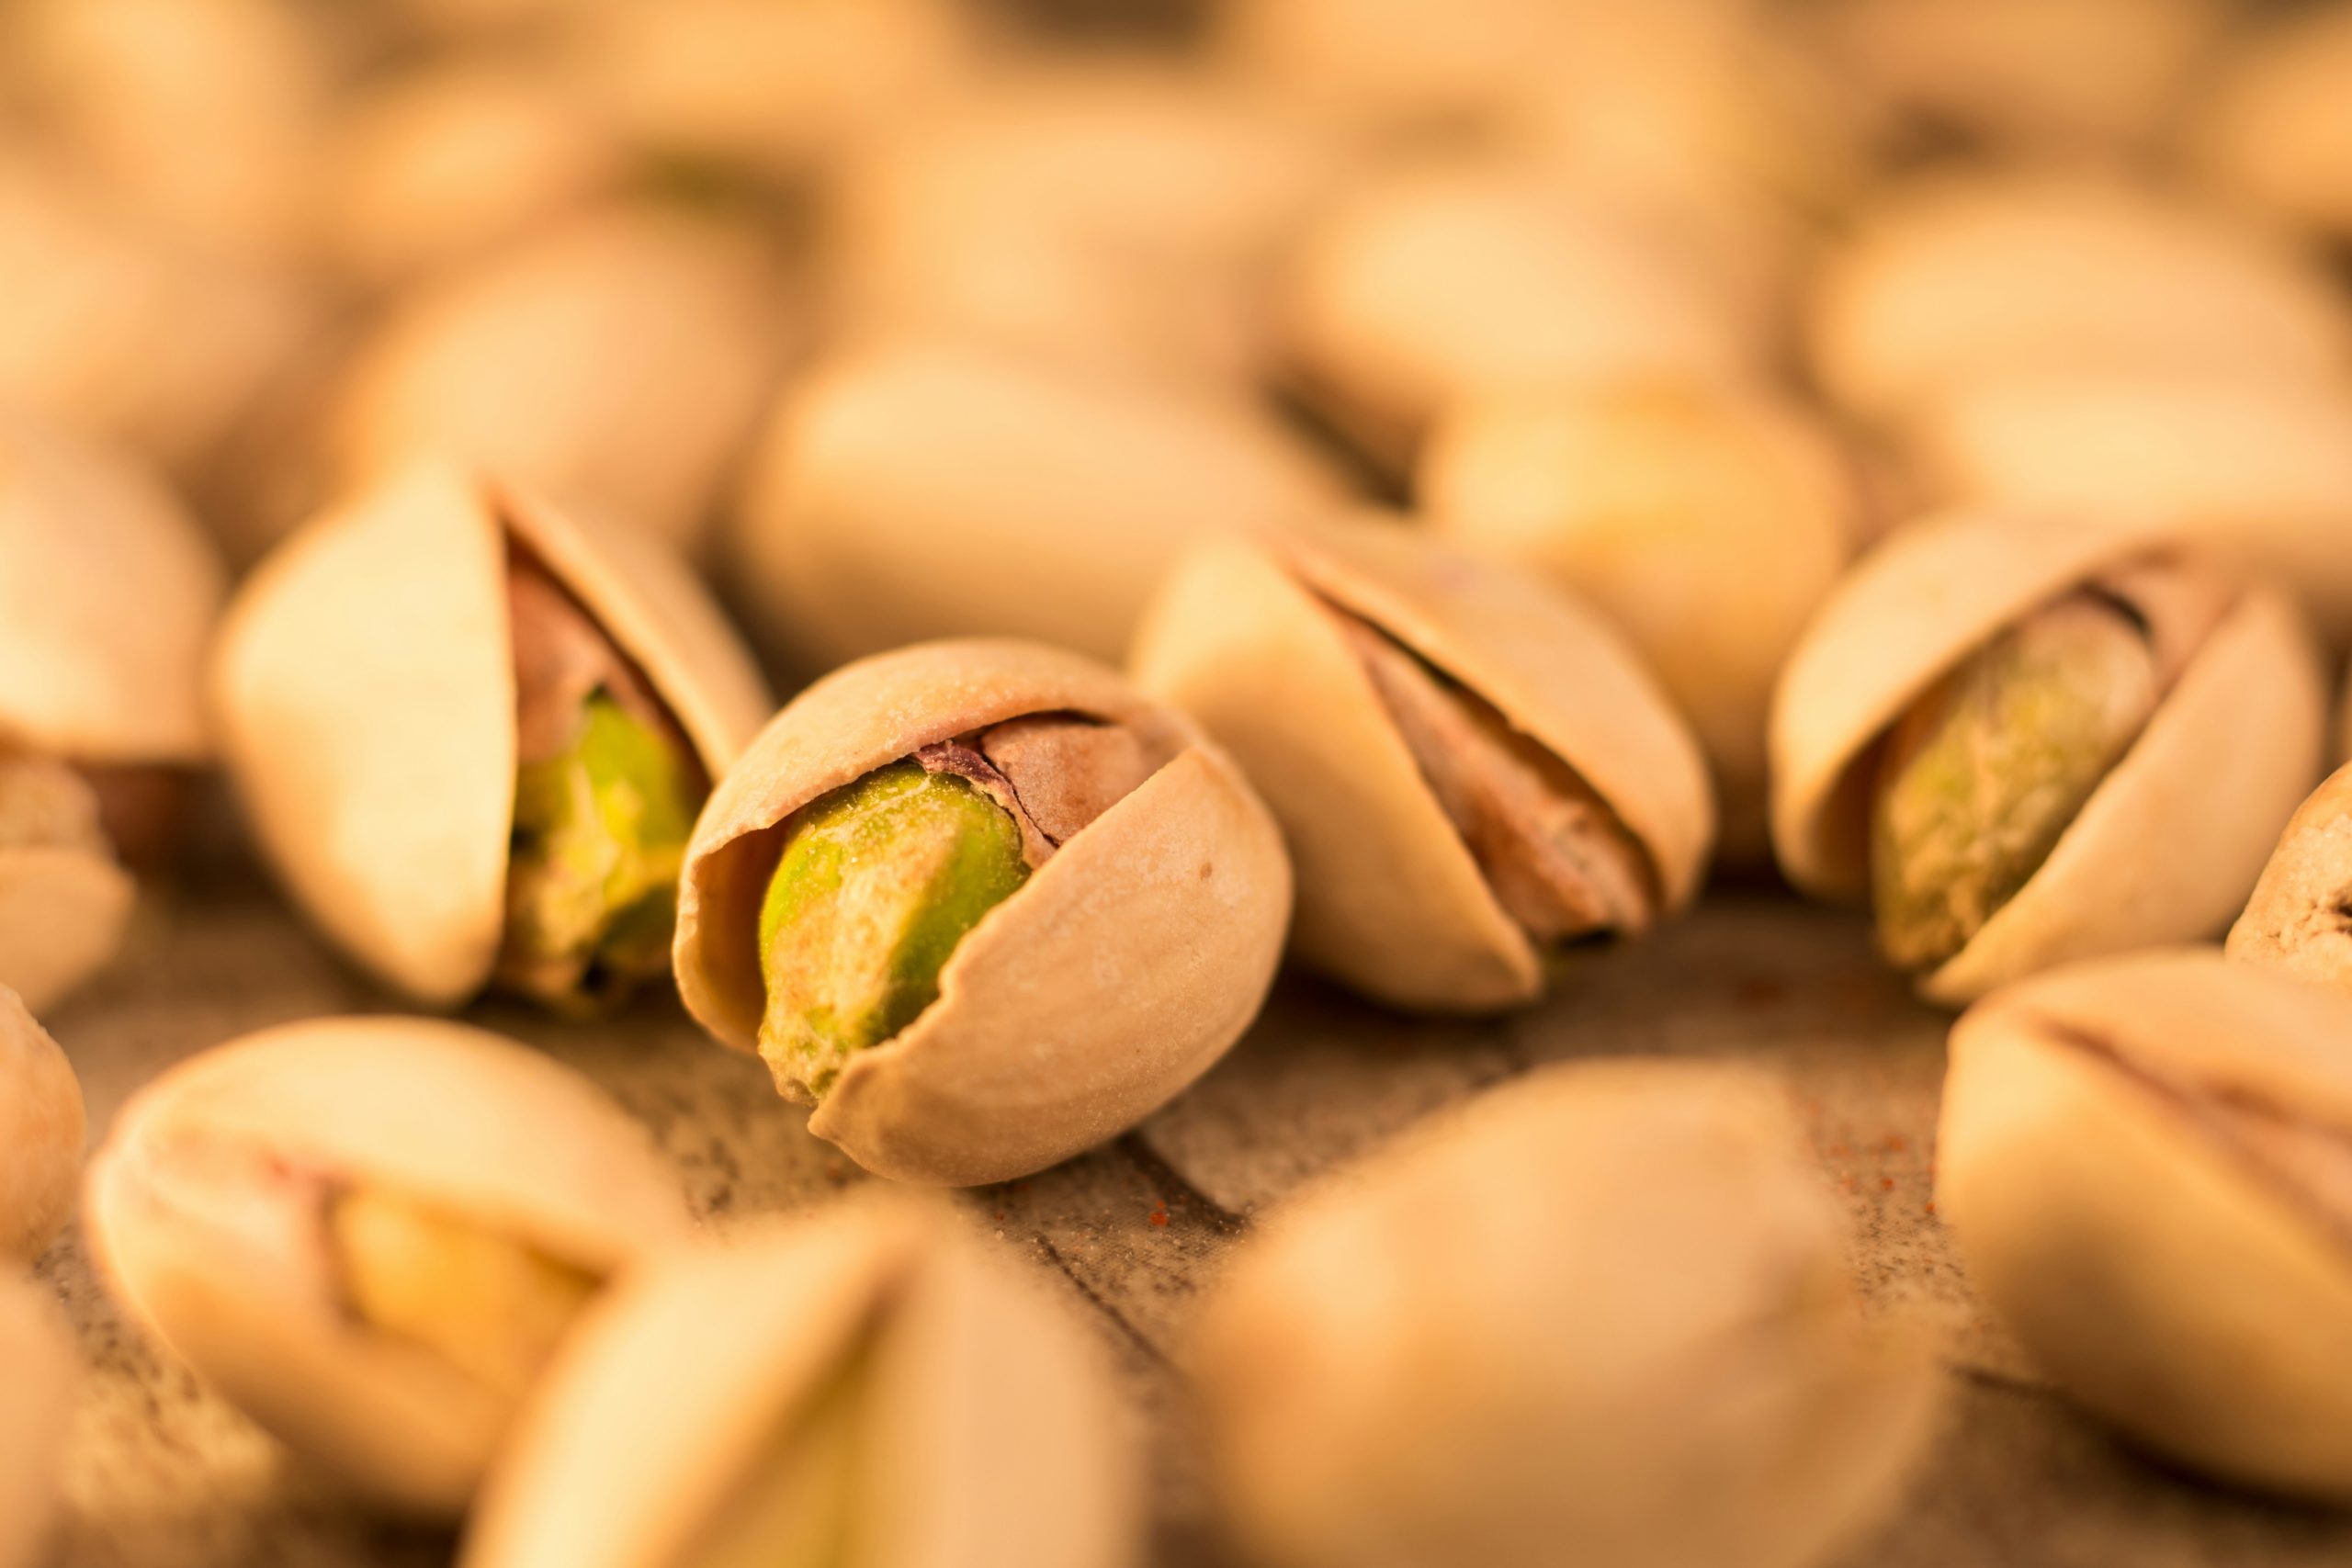 How eating pistachios daily can help improve brain function and memory, according to Harvard scientists